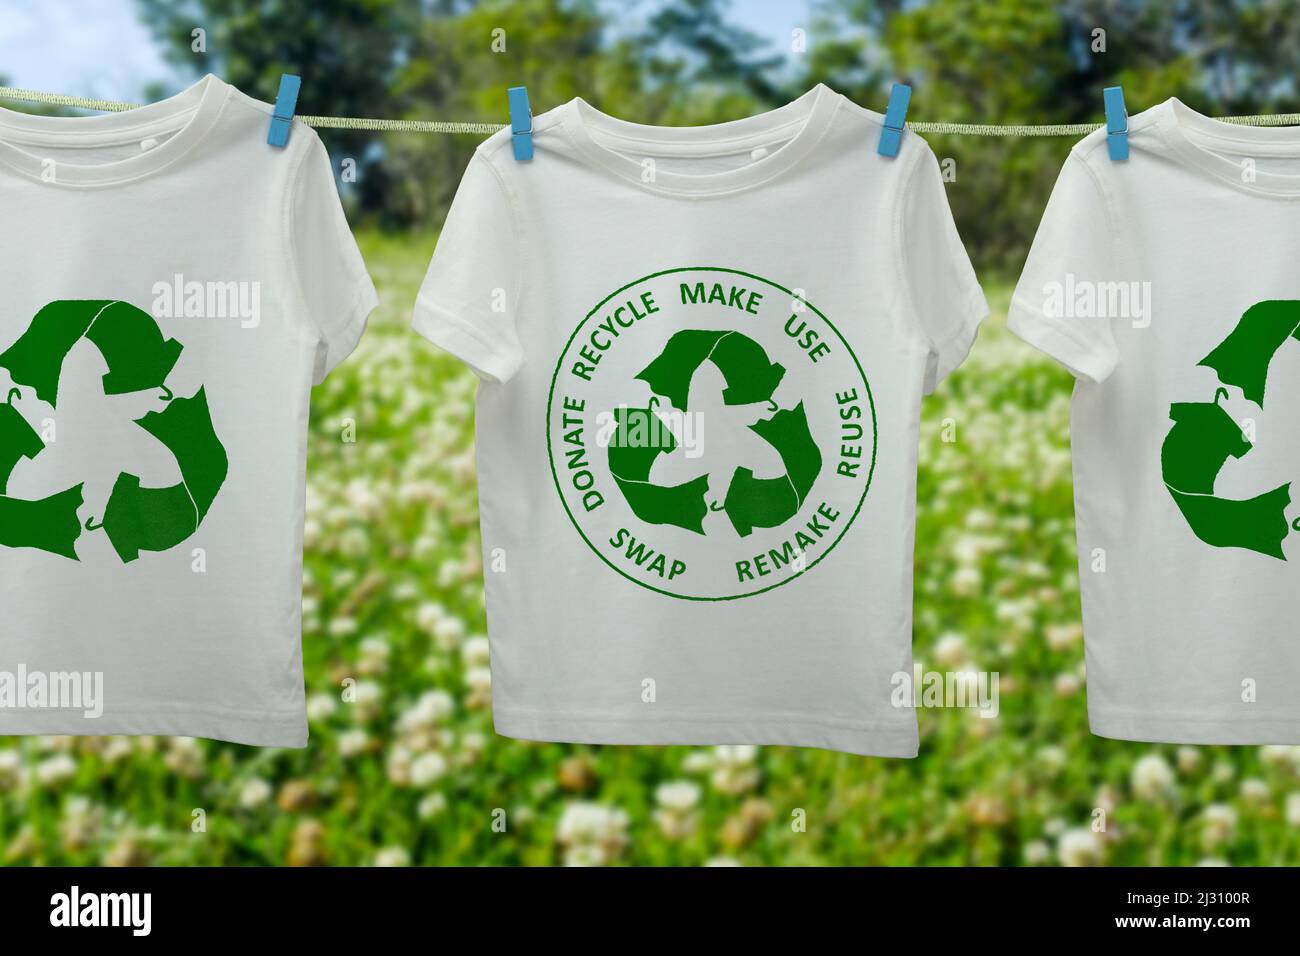 Circular economy textiles icon on t shirts on line, sustainable fashion concept reuse, recycle clothes and textiles to reduce waste Stock Photo